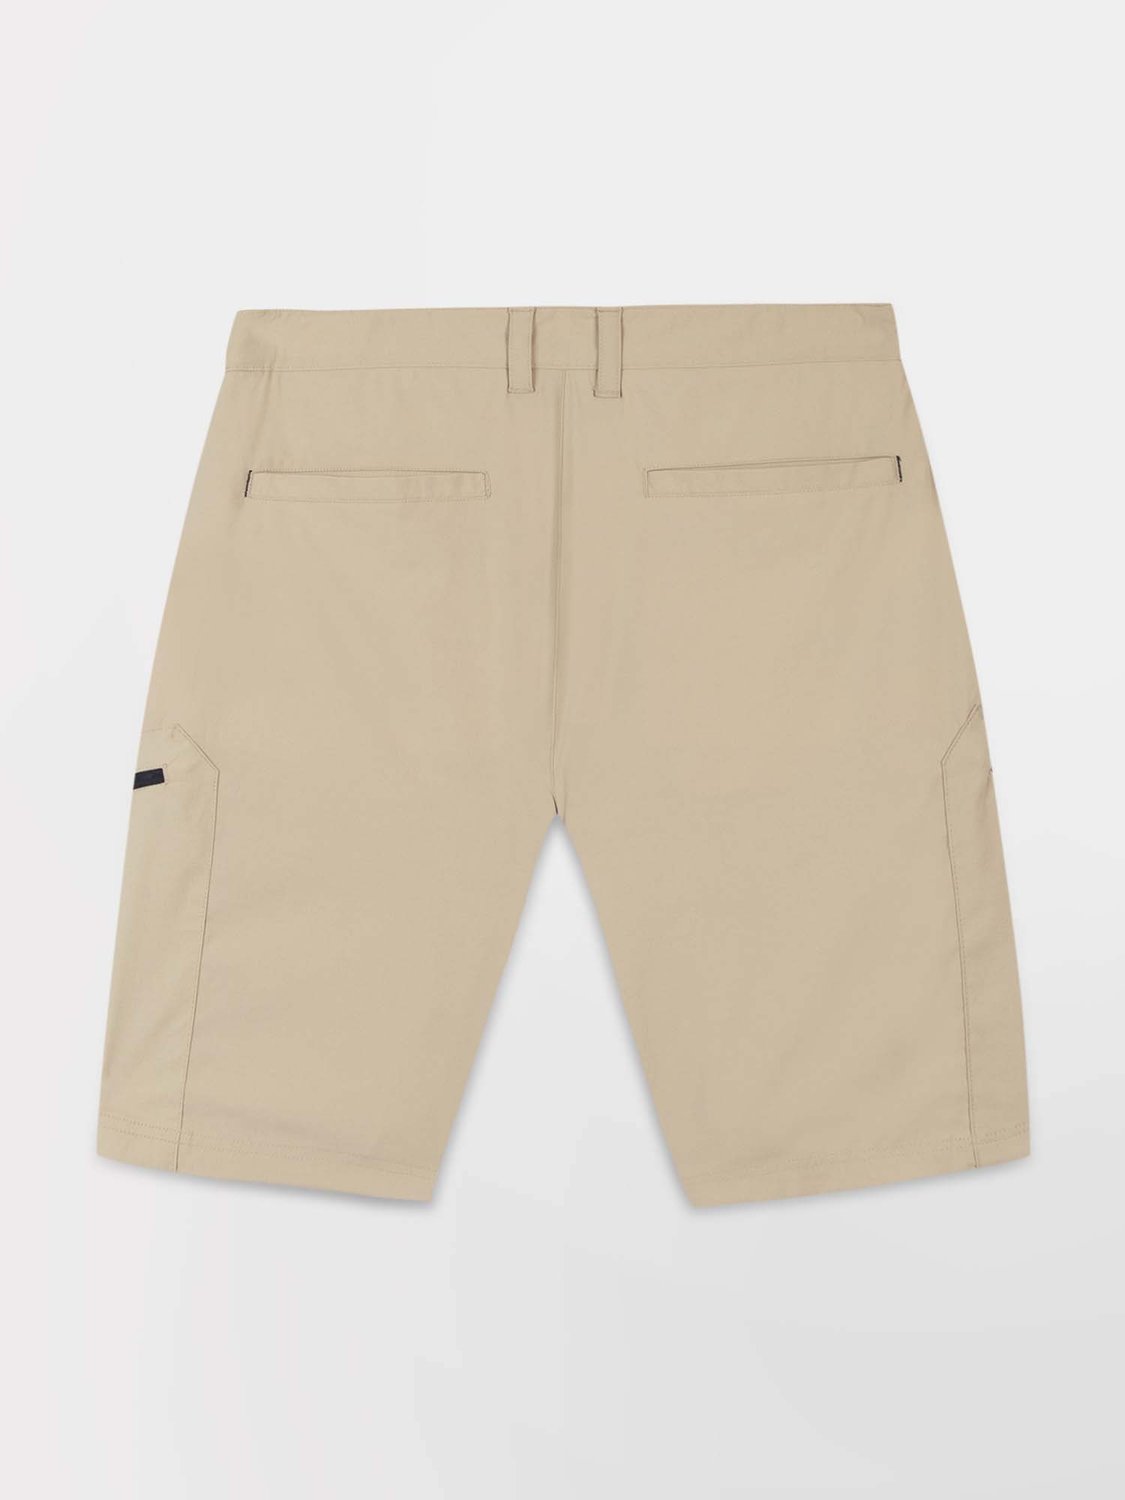 Short Homme Stretch Taille Ajustable Beige